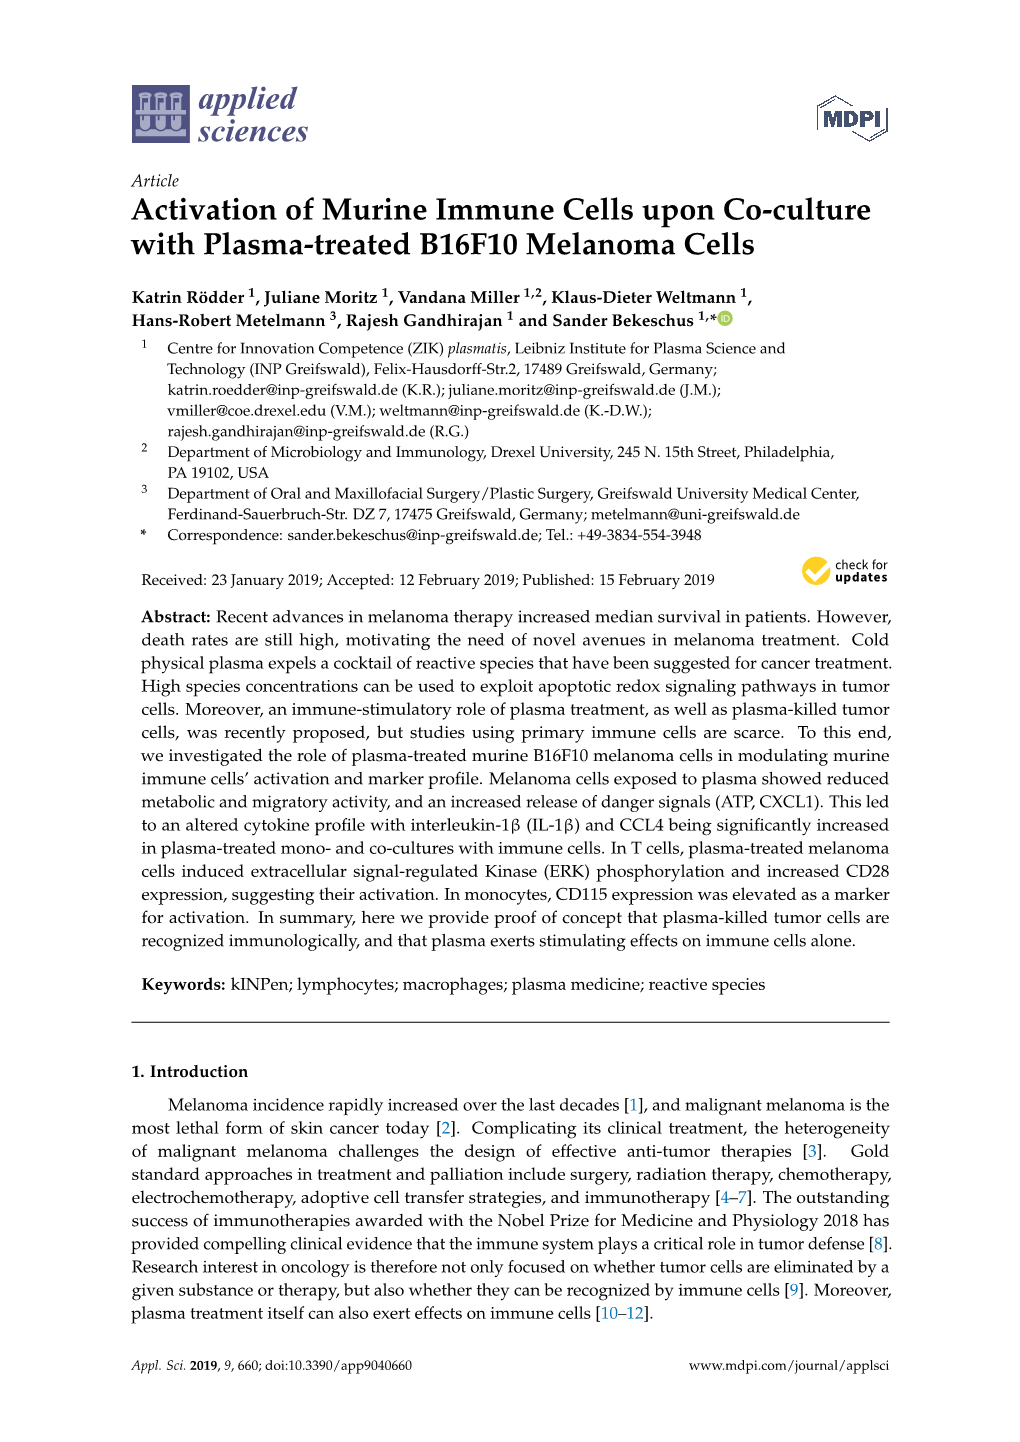 Activation of Murine Immune Cells Upon Co-Culture with Plasma-Treated B16F10 Melanoma Cells